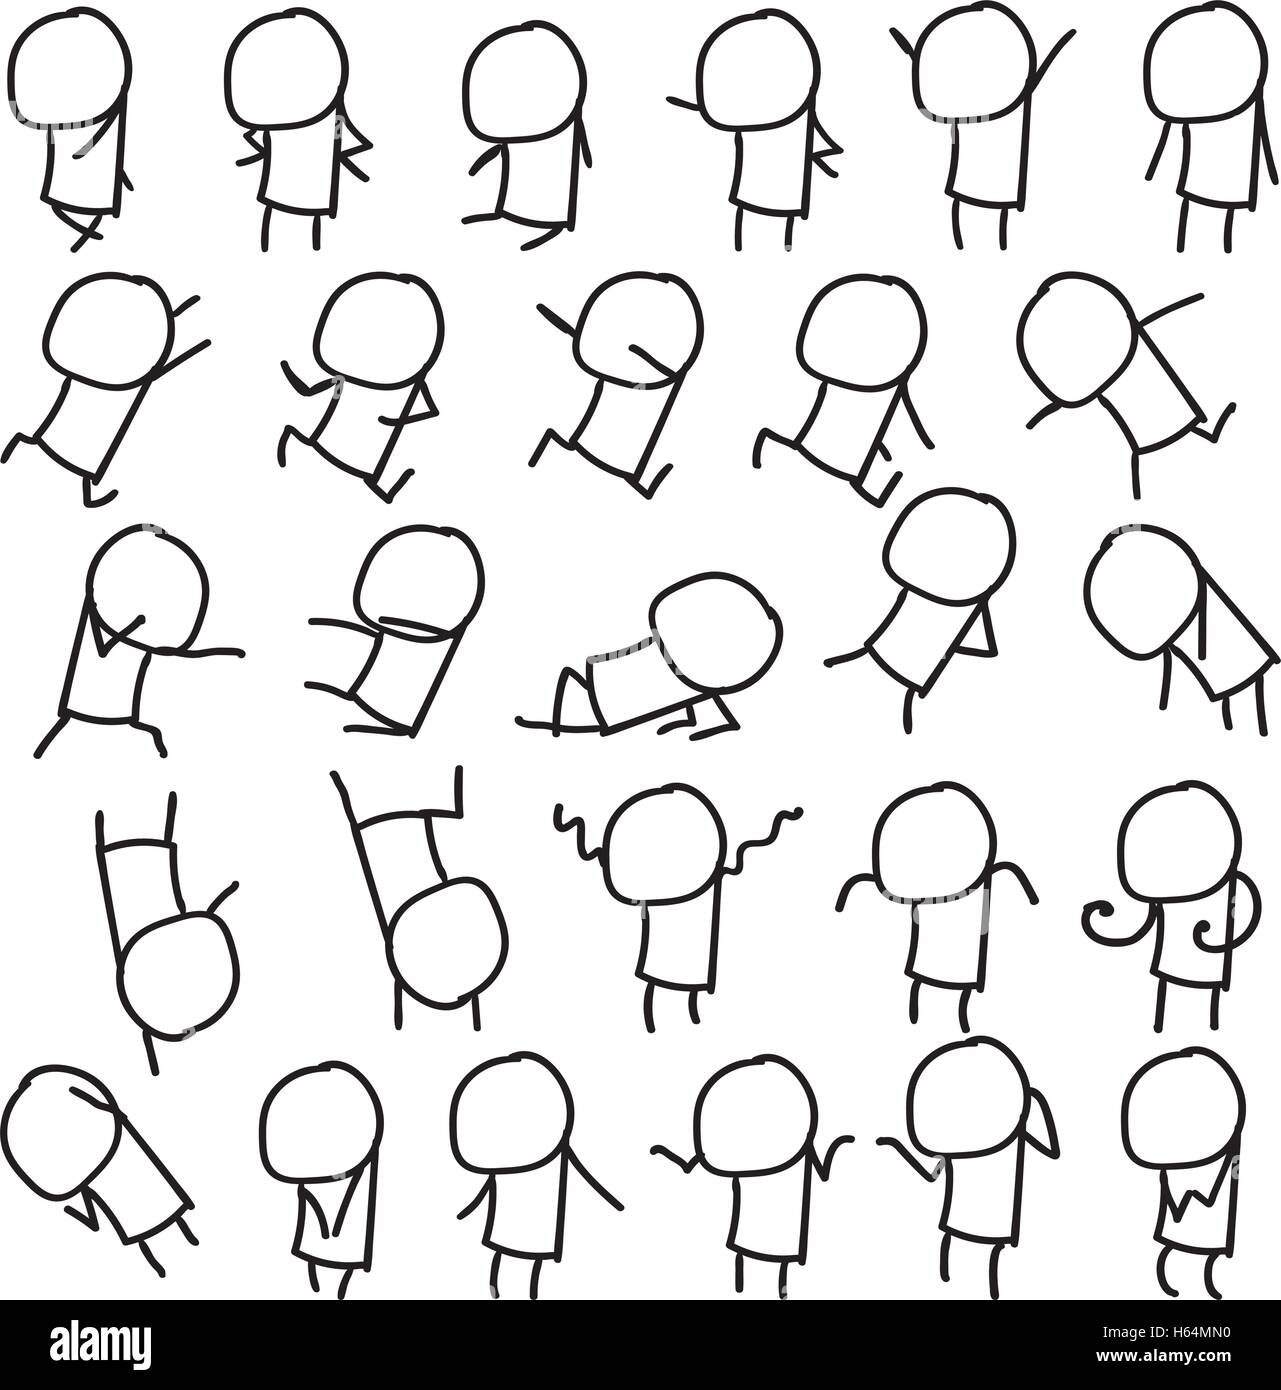 Premium Vector  Stick figure, man doodle drawing, isolated